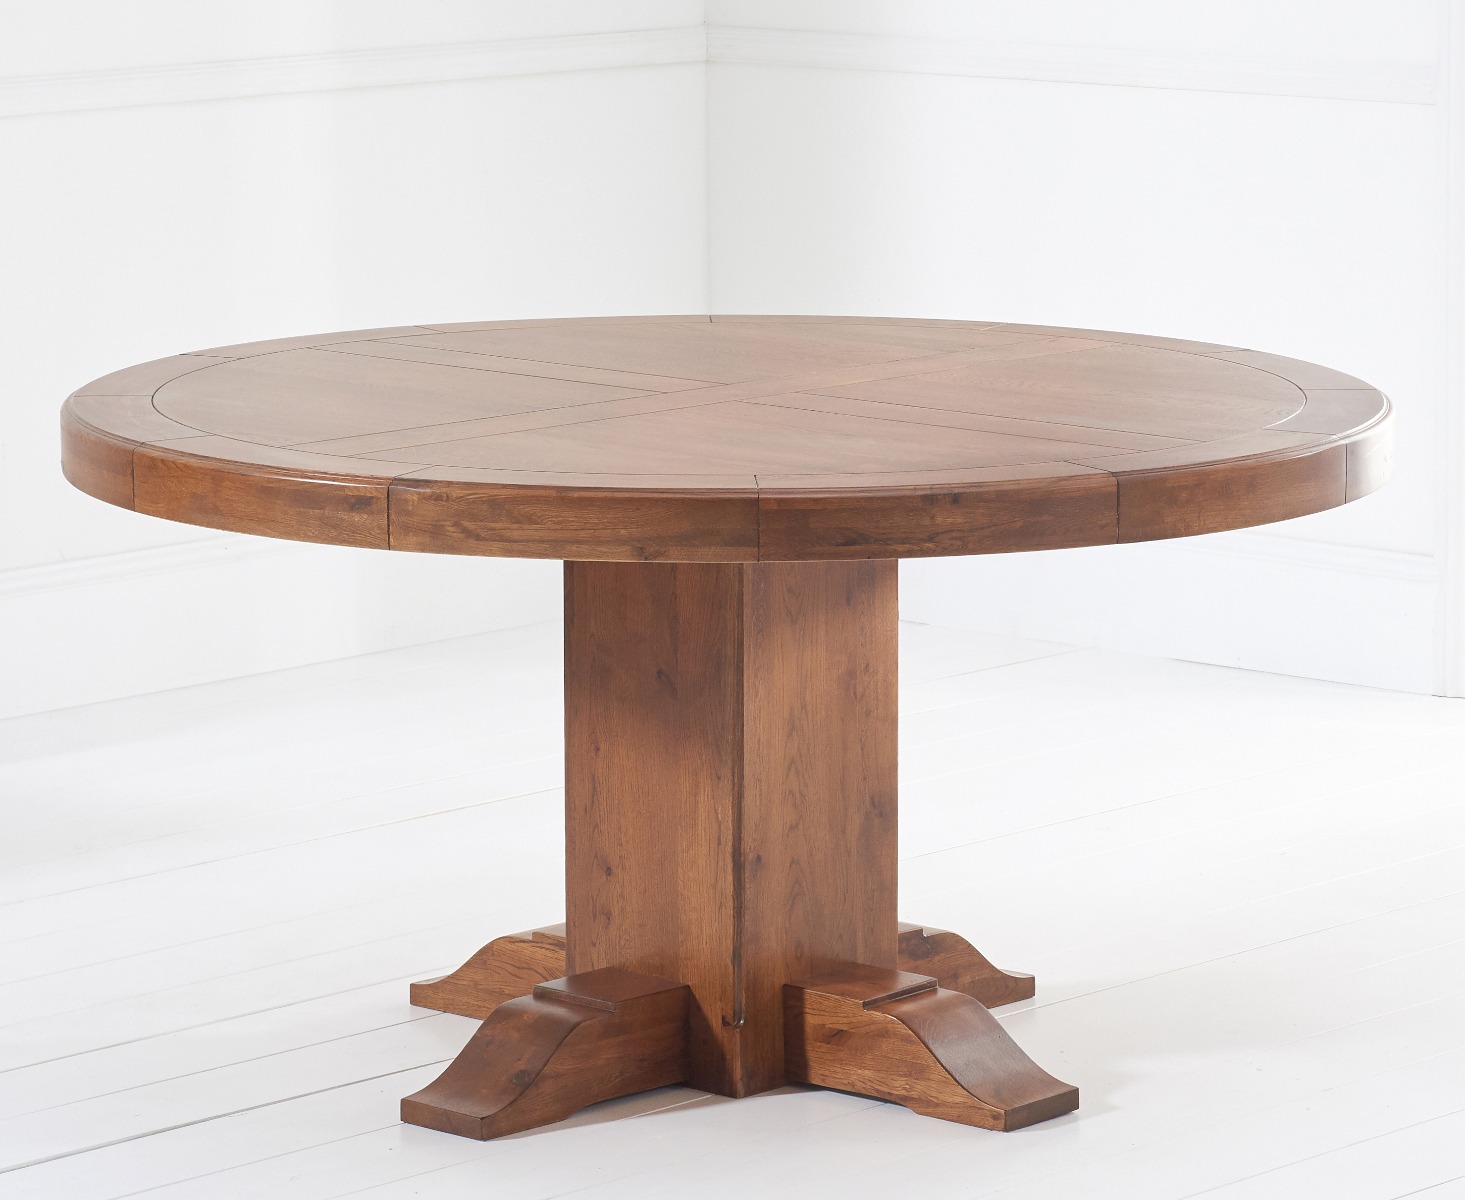 Photo 4 of Helmsley 150cm dark oak round pedestal dining table with 6 grey keswick chairs